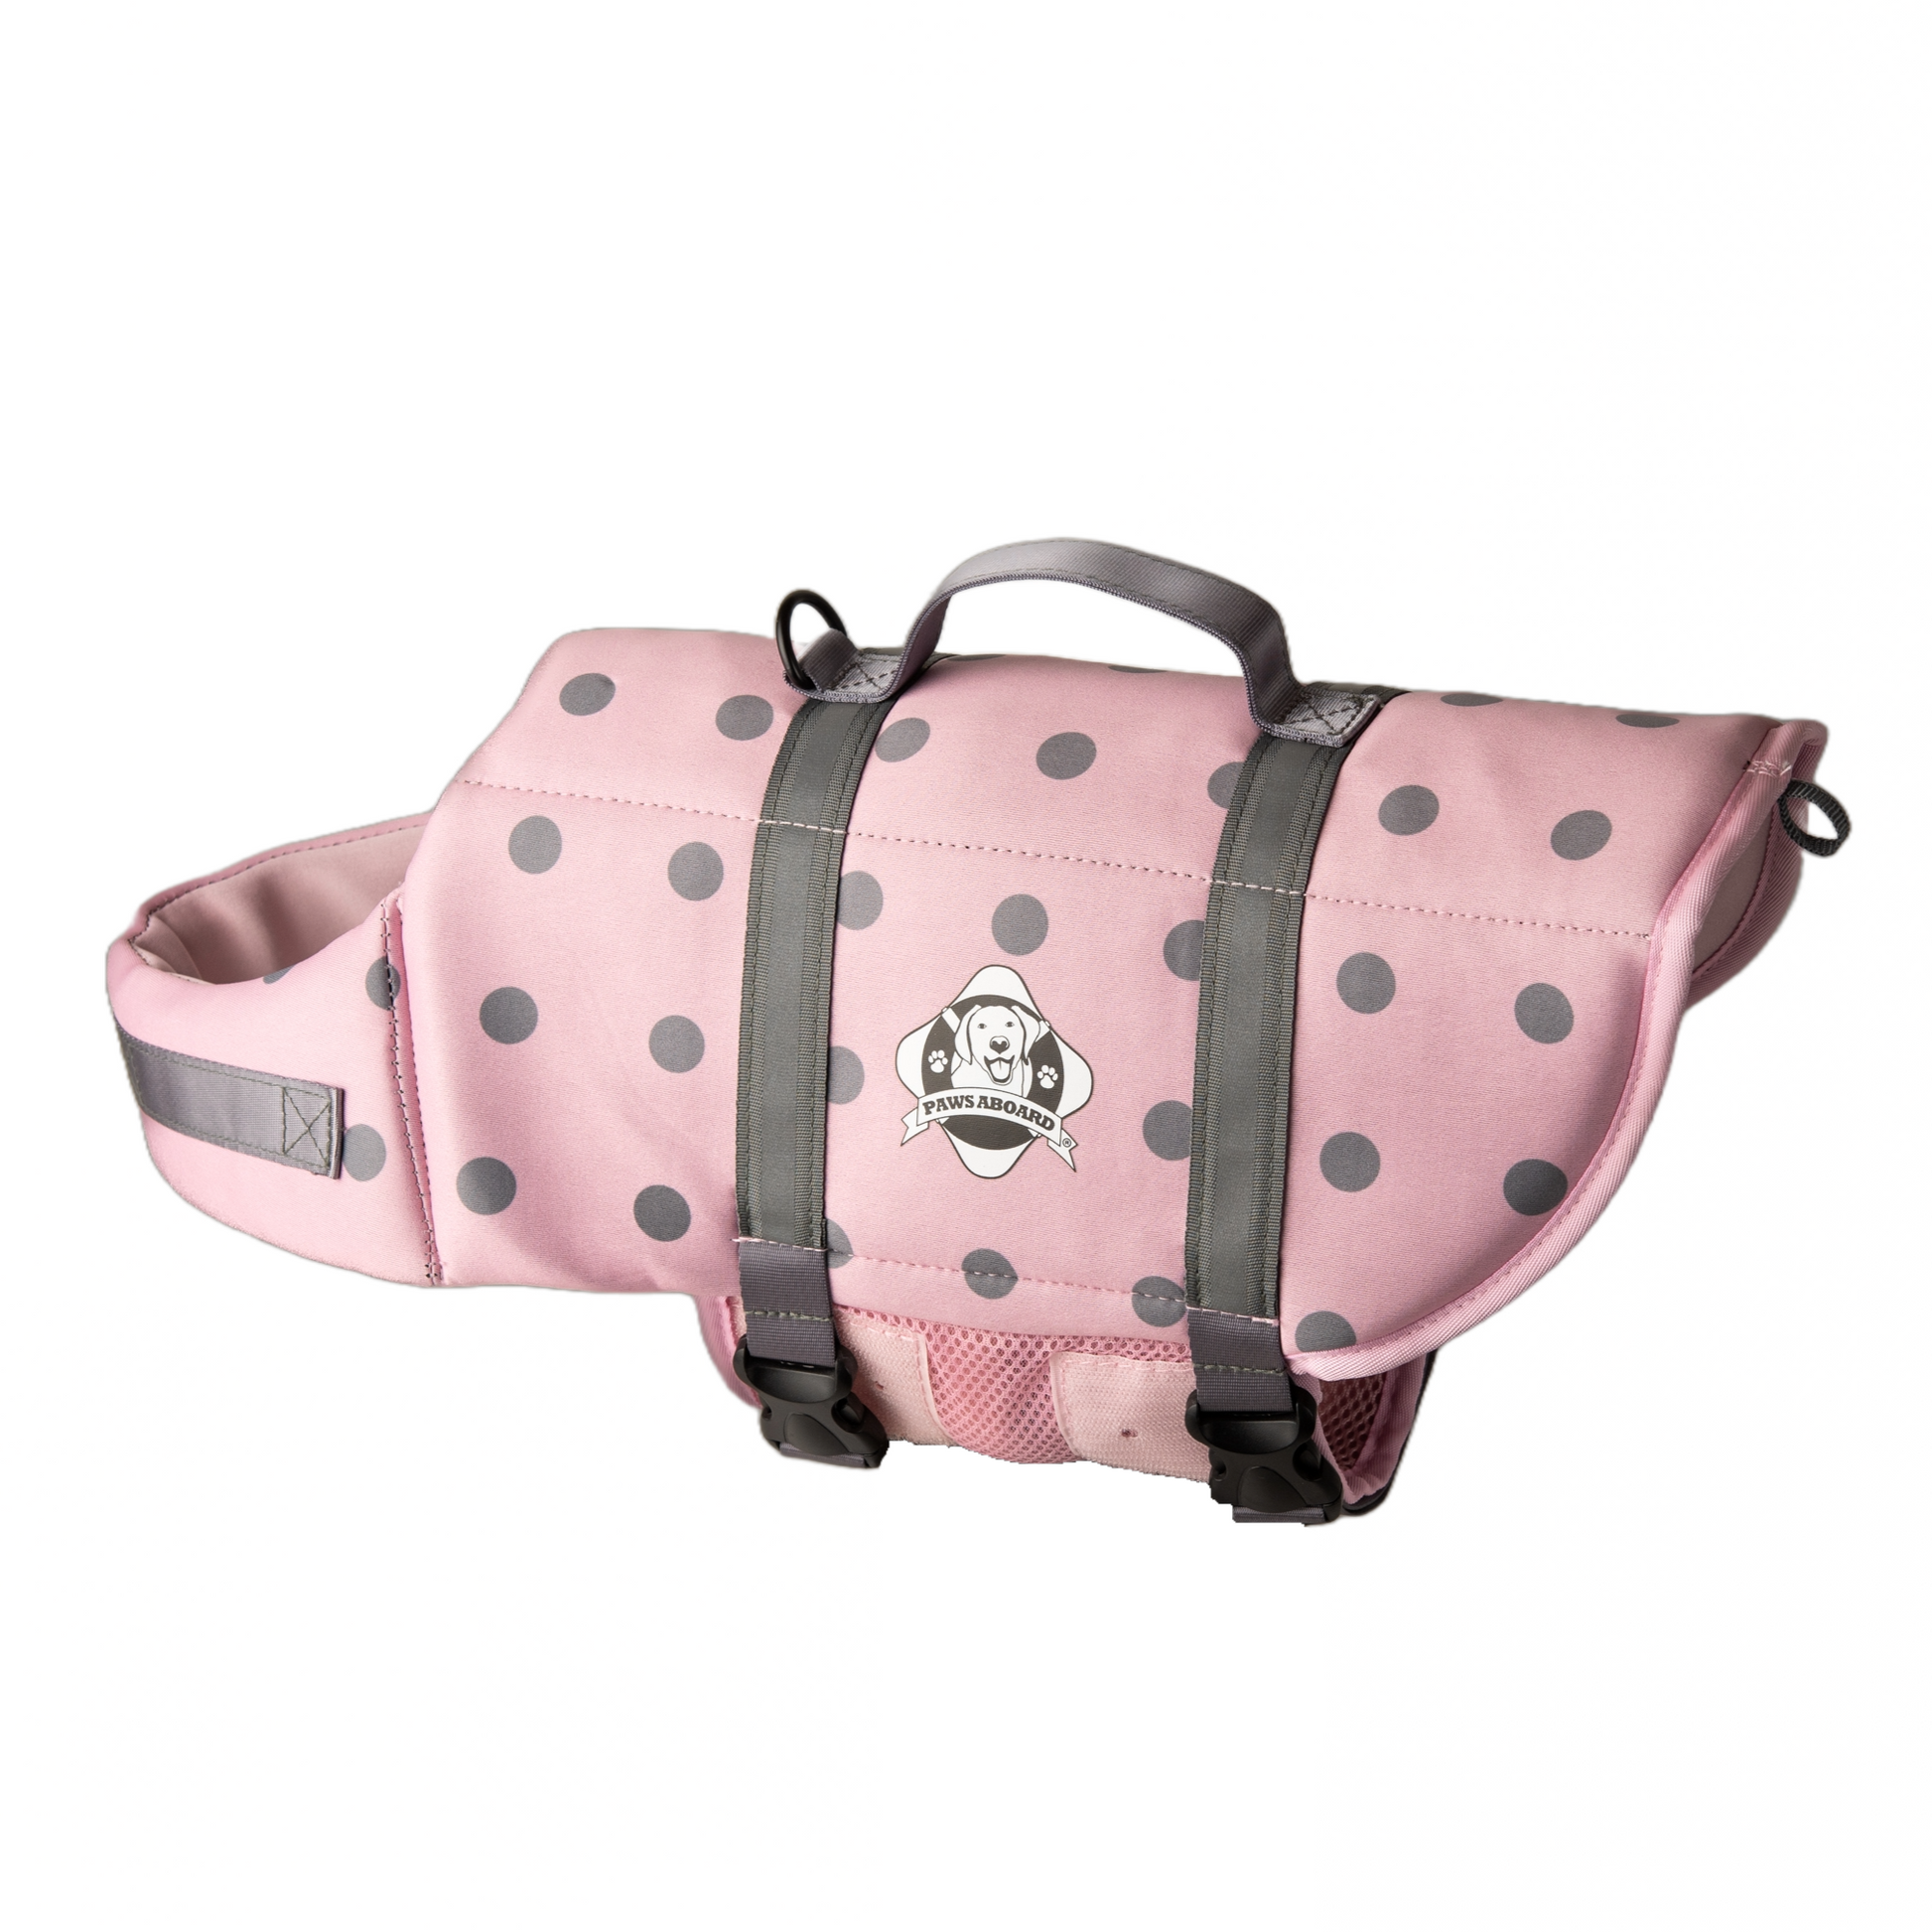 Pink and grey polka dot dog life jacket with reflective straps and top rescue handle. Paws Aboard logo on side of neoprene jacket centered between the straps.